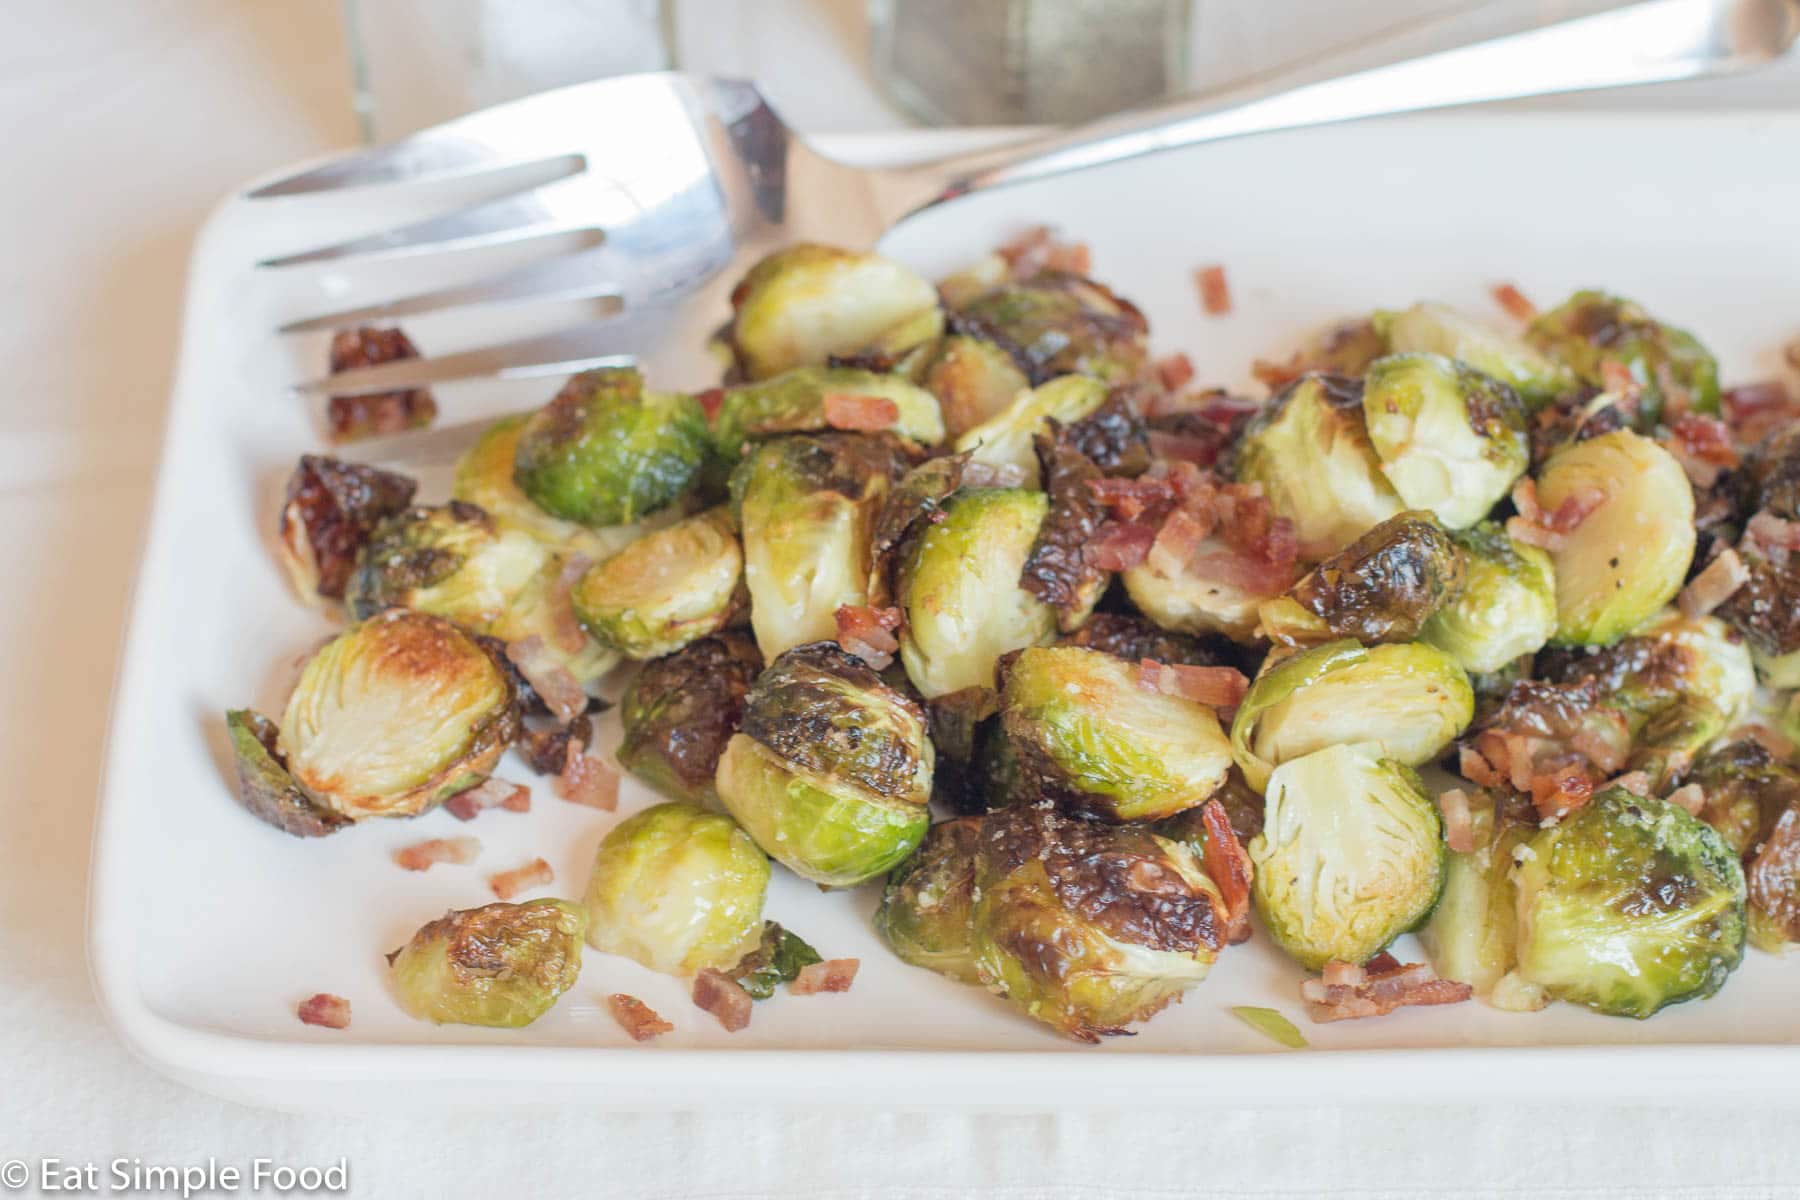 Roasted Brussels Sprouts with Crispy diced pancetta on a white platter with a large silver fork. side view.